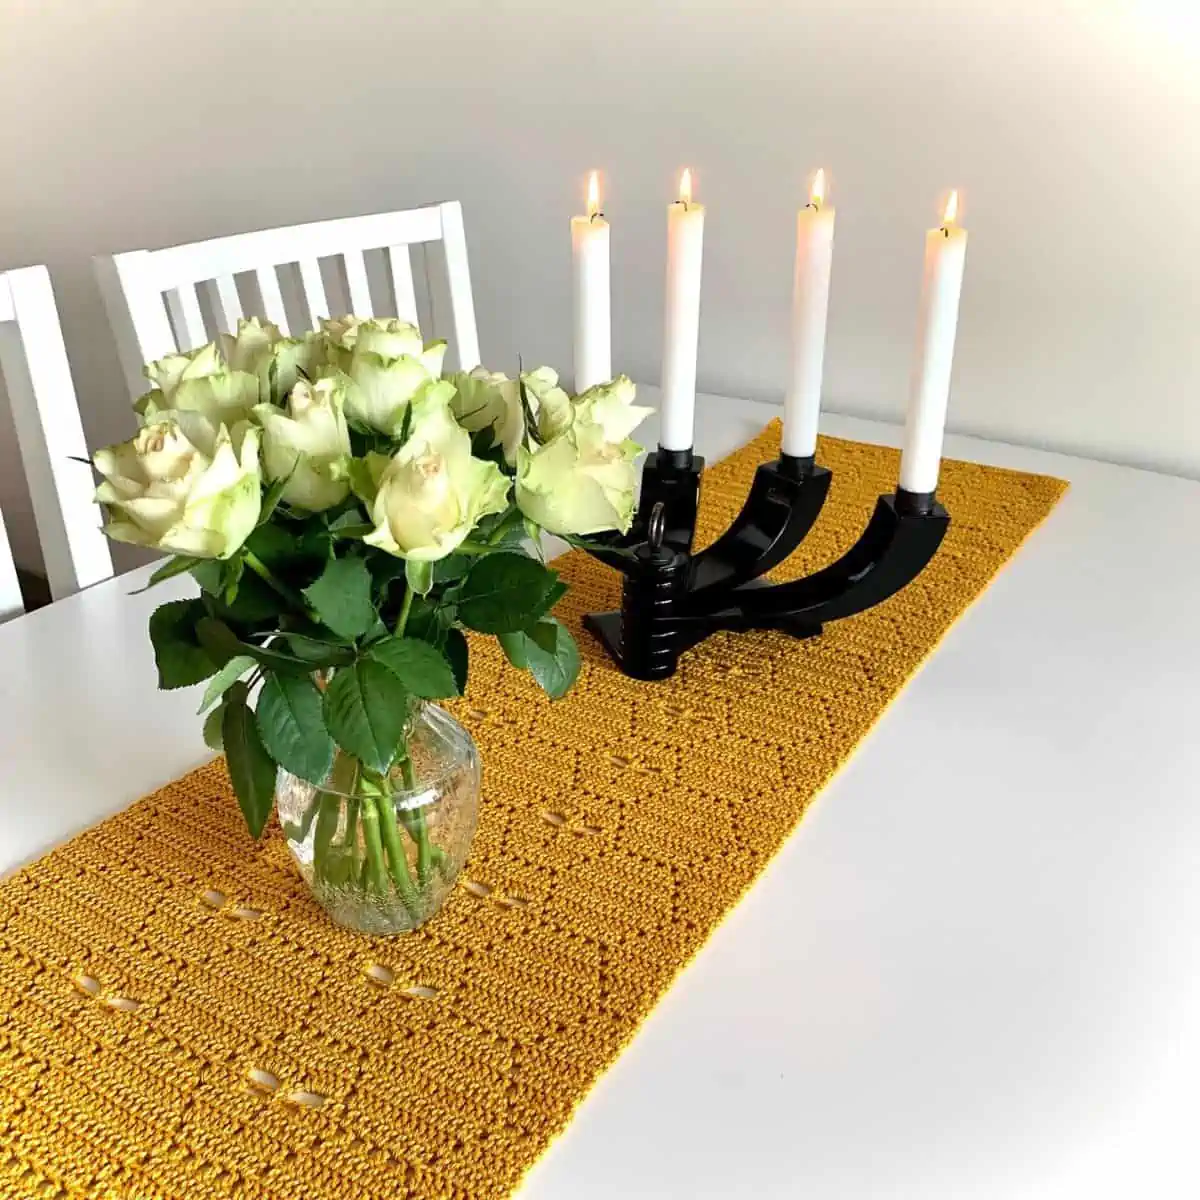 yellow crochet table runner with a hexagon motif laying on a table with candles and flowers on it